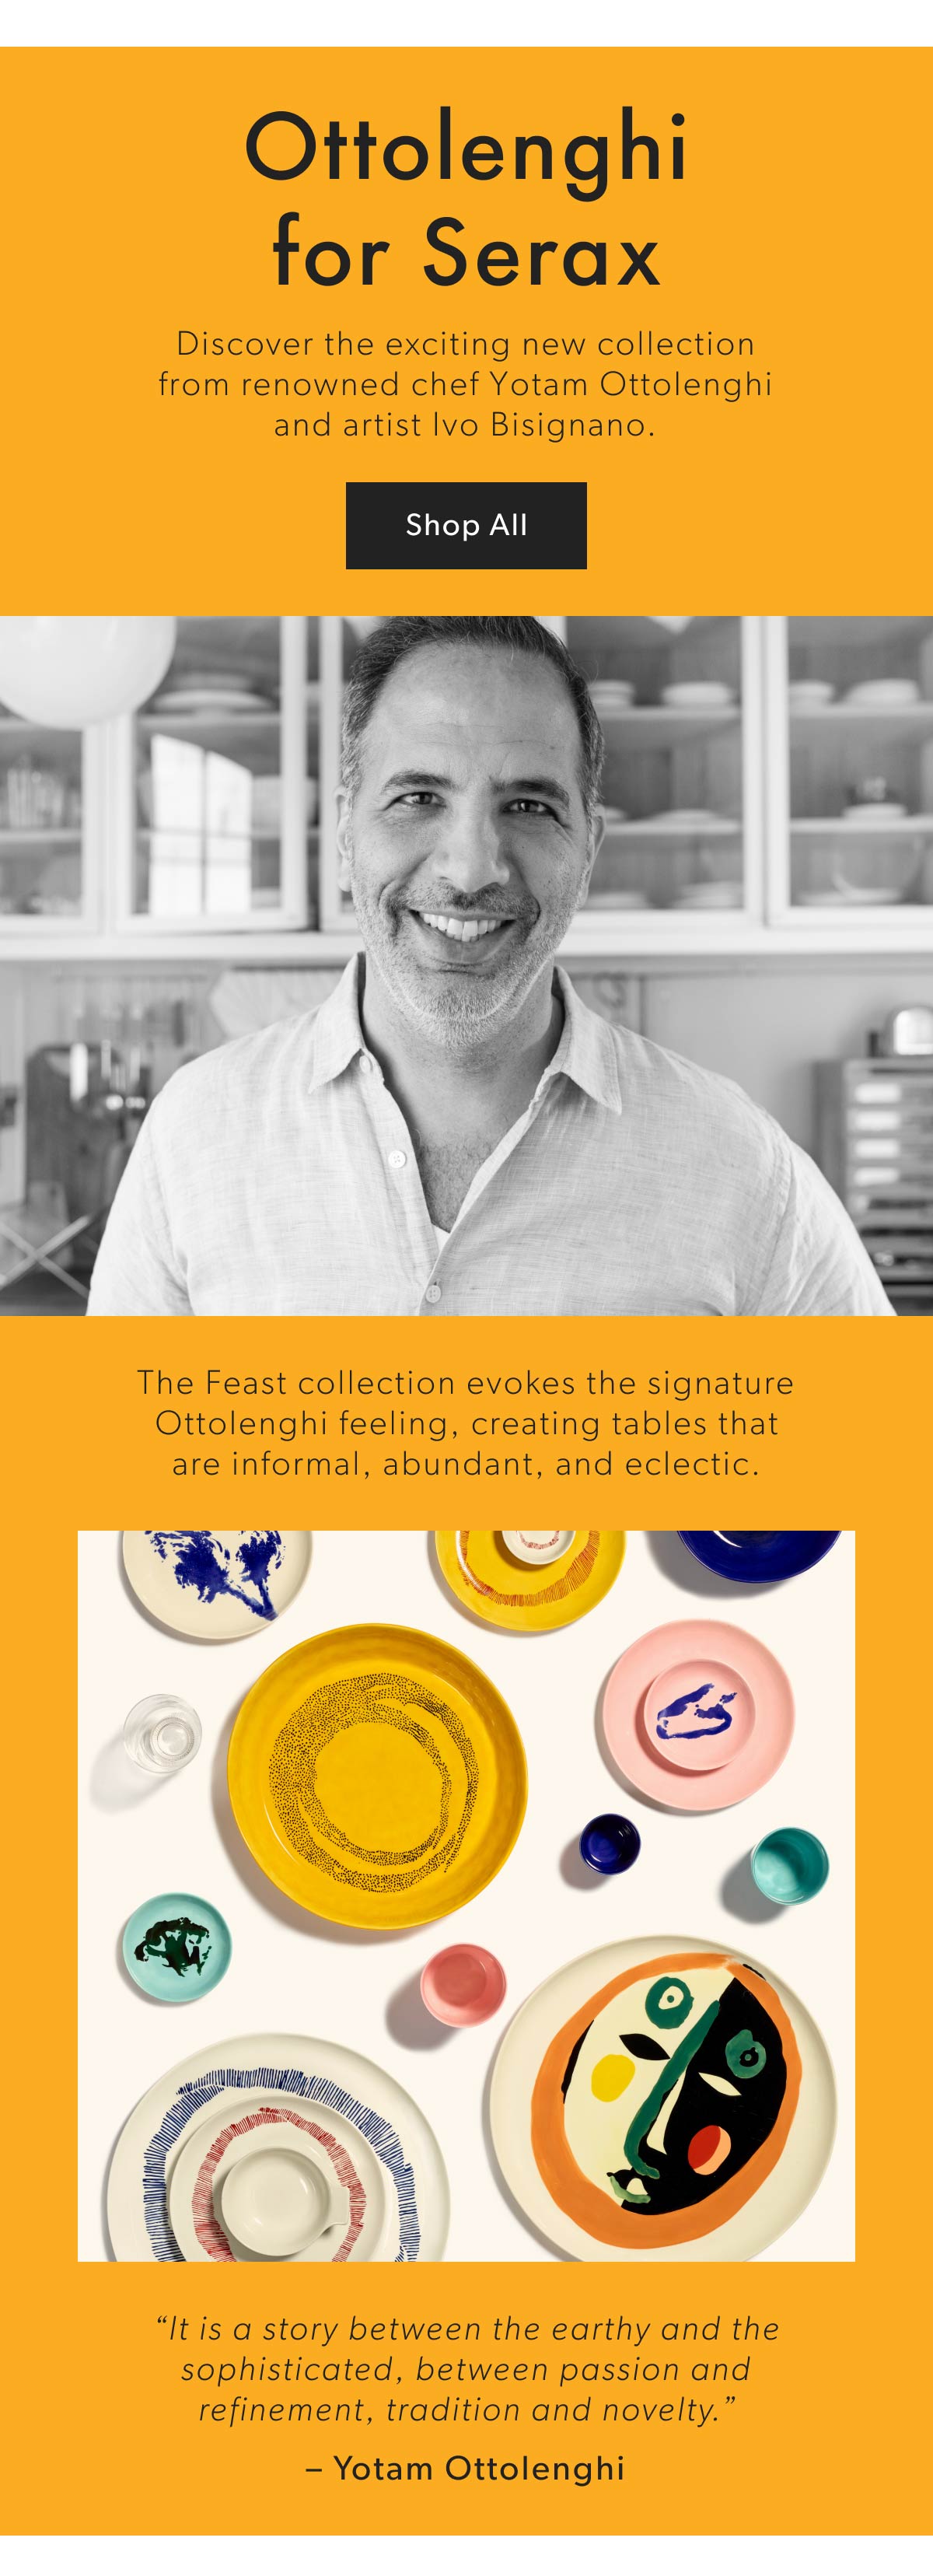 Ottolenghi for Serax